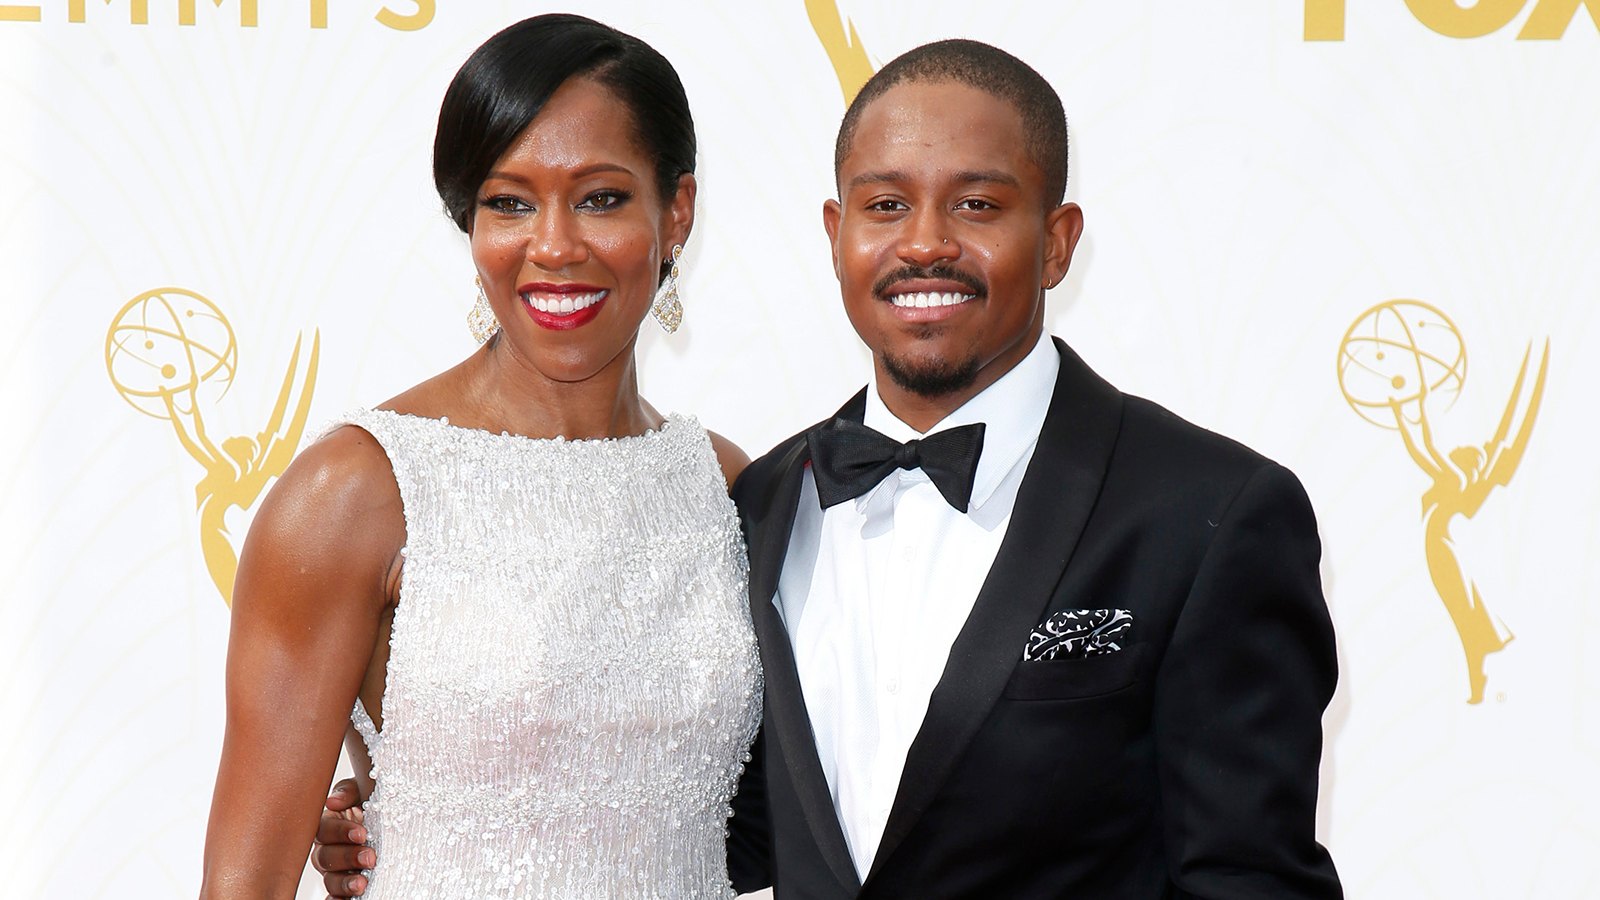 Regina King Honors Late Son Ian 1 Year After His Death: 'I See You in Everything I Breathe'